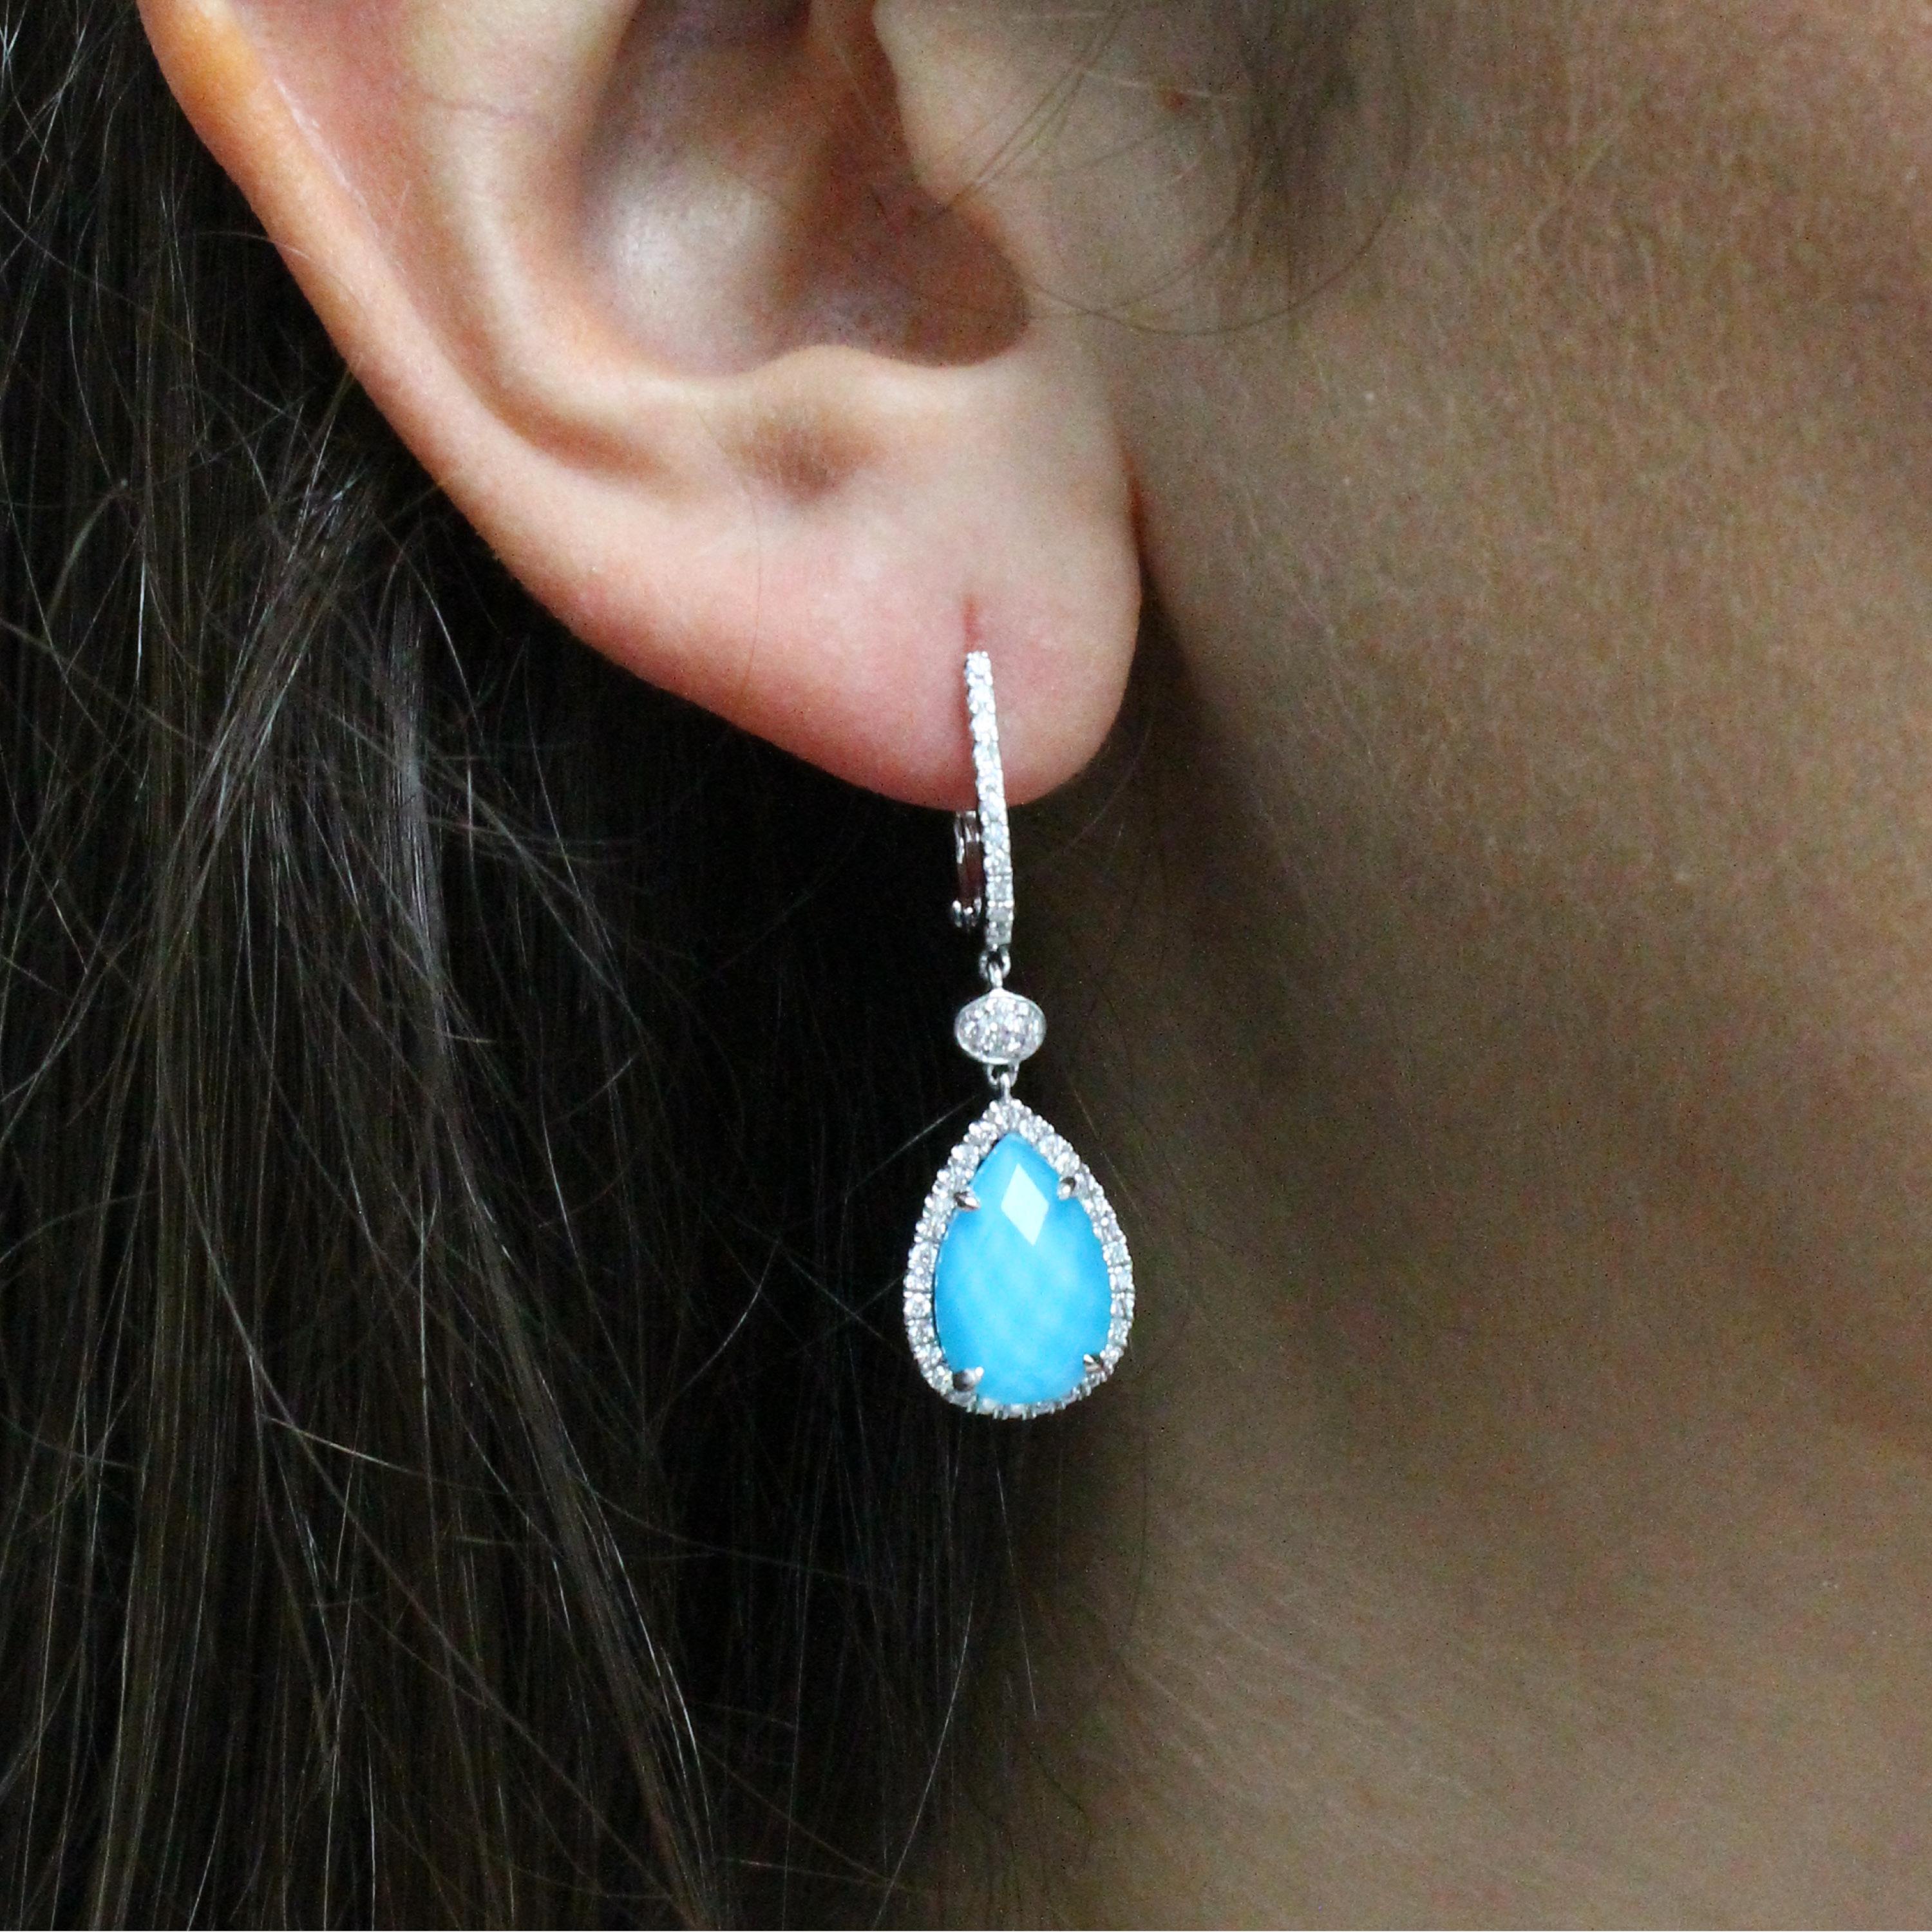 St. Barths Blue Dangle Earrings featuring checker-cut, pear shaped White Topaz layered with Natural Arizona Turquoise, surrounded by a diamond halo, set in 18K white gold. Earrings hang from diamond huggie tops, with an oval pave of diamonds in